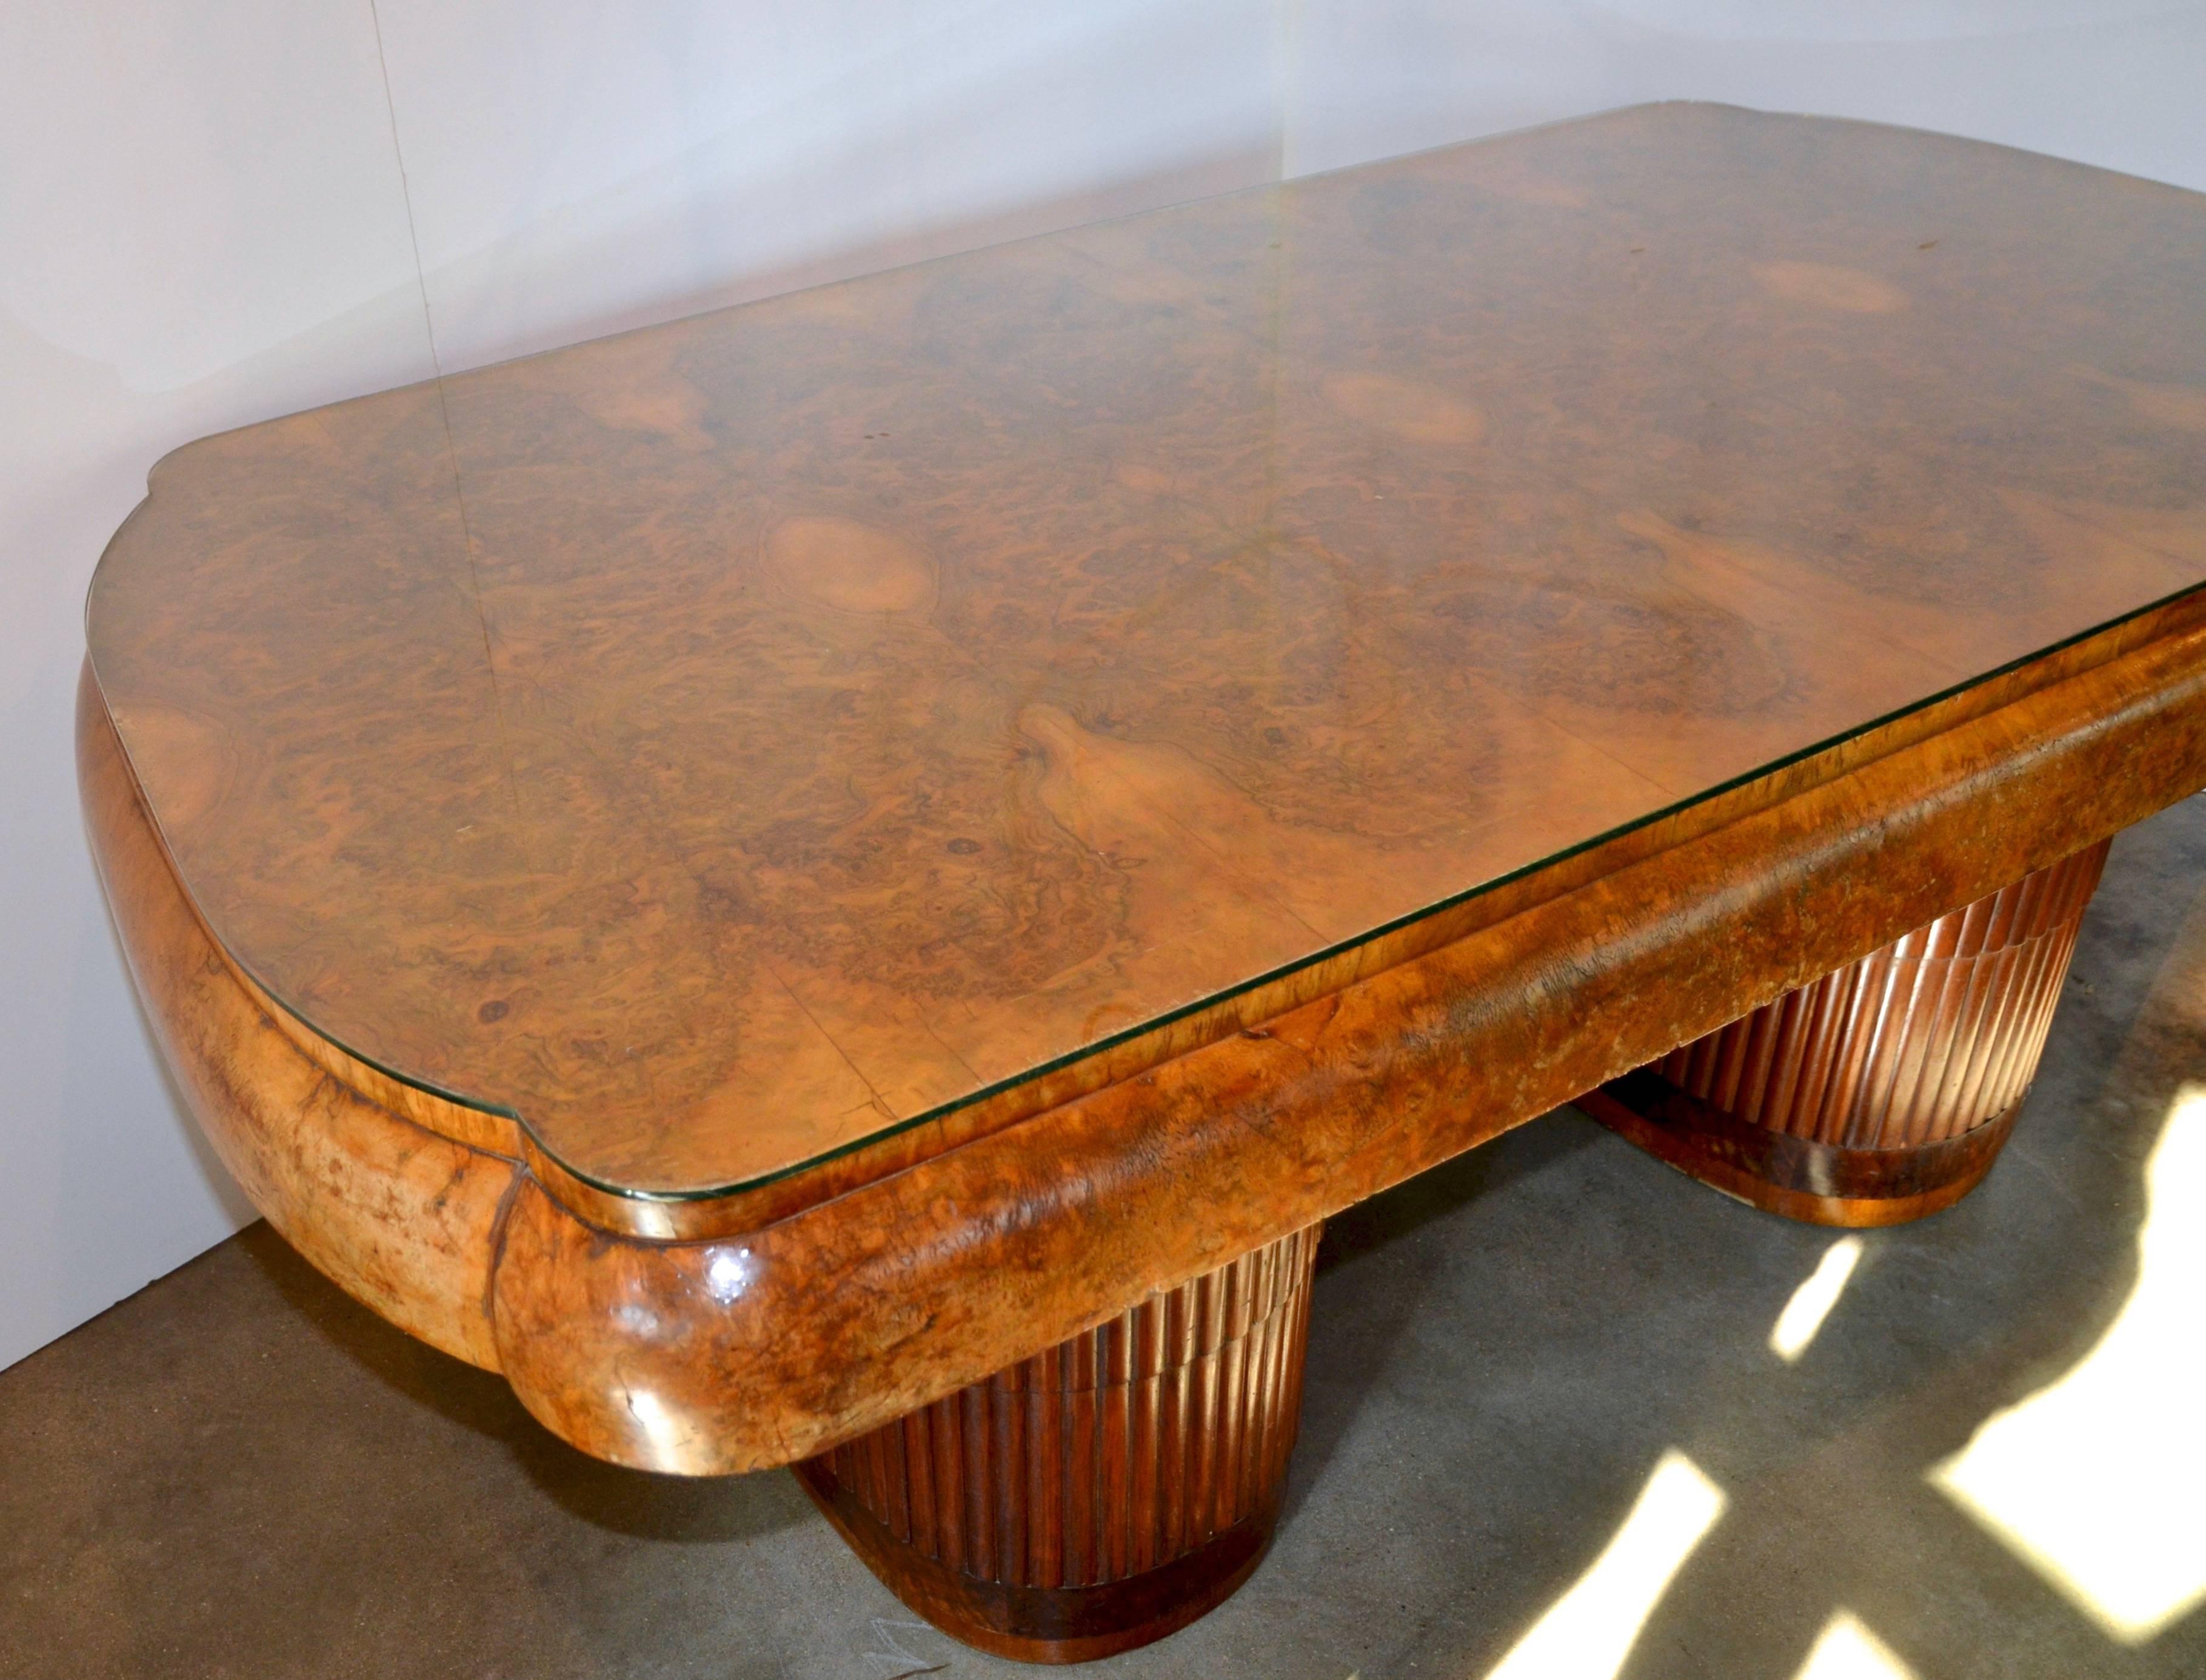 20th Century French 1940's Desk or Dining Table with Adjustable Bases, Burl and Glass Top